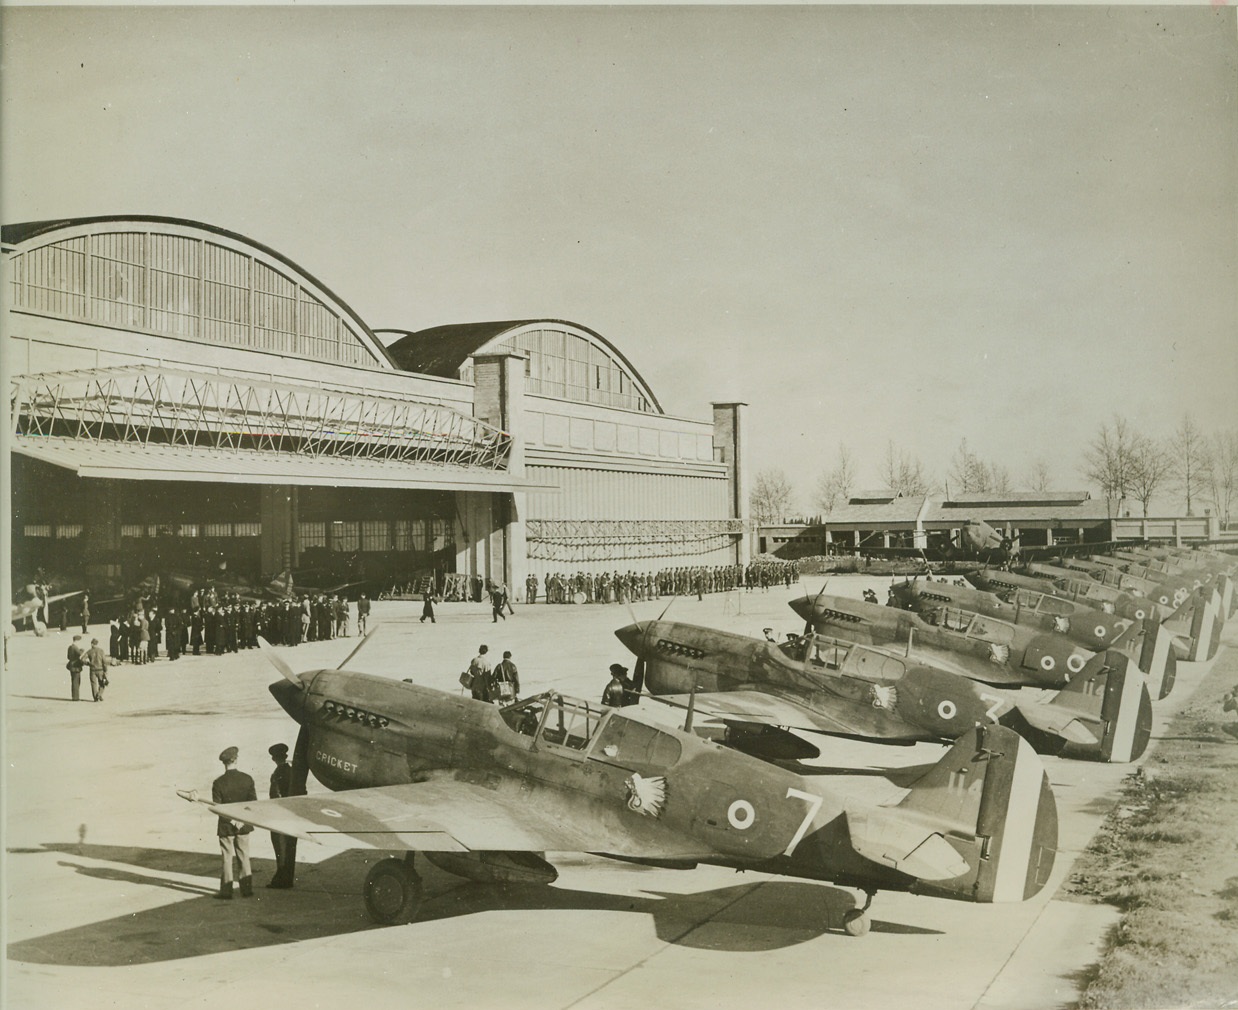 American Donate Planes to Free French, 2/4/1943. Somewhere in North Africa – Thirteen P-40’s stand ready to be flown by Free French pilots, at an airport “somewhere in North Africa.” The speedy Warhawks were presented to the Free French Air Force on behalf of the people of the United States. Credit (U.S. Army Official Photo – ACME);